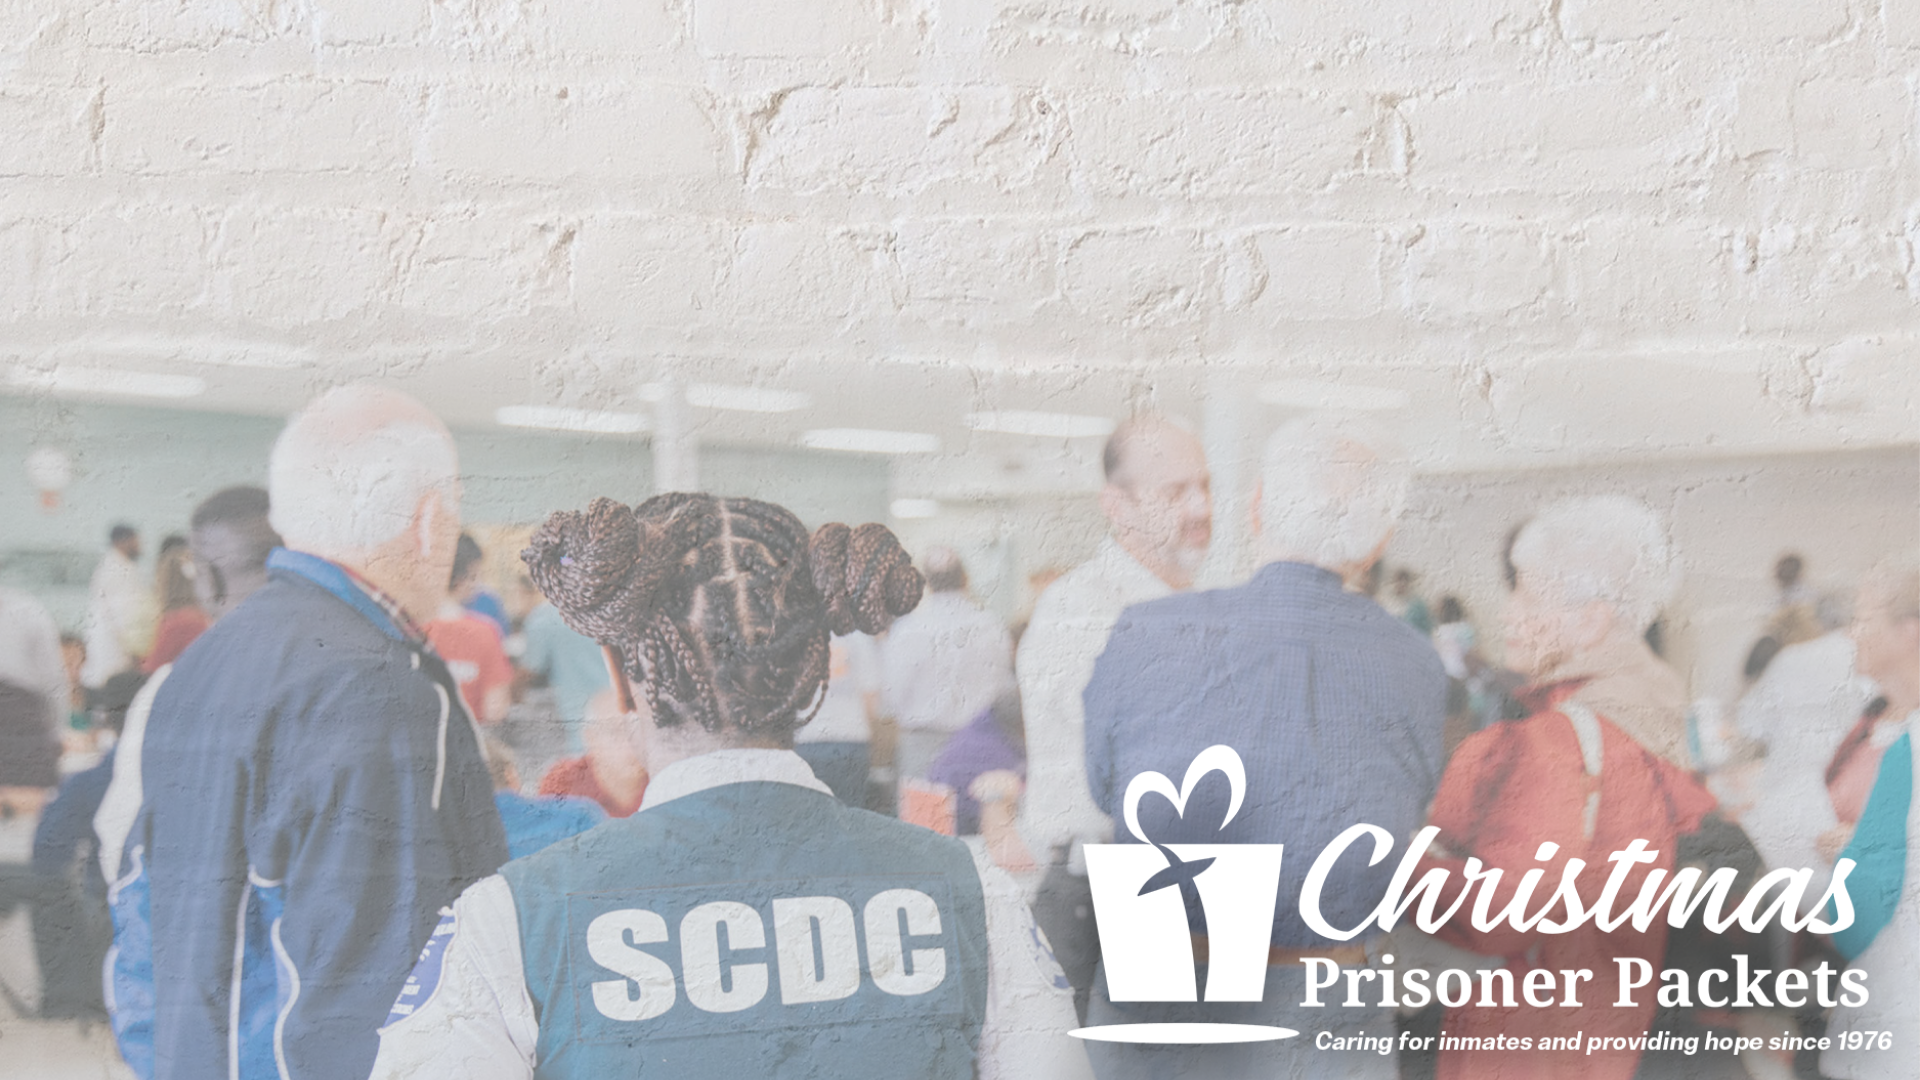 2020 Prisoner Packets: Ending Year with Hope, Good News